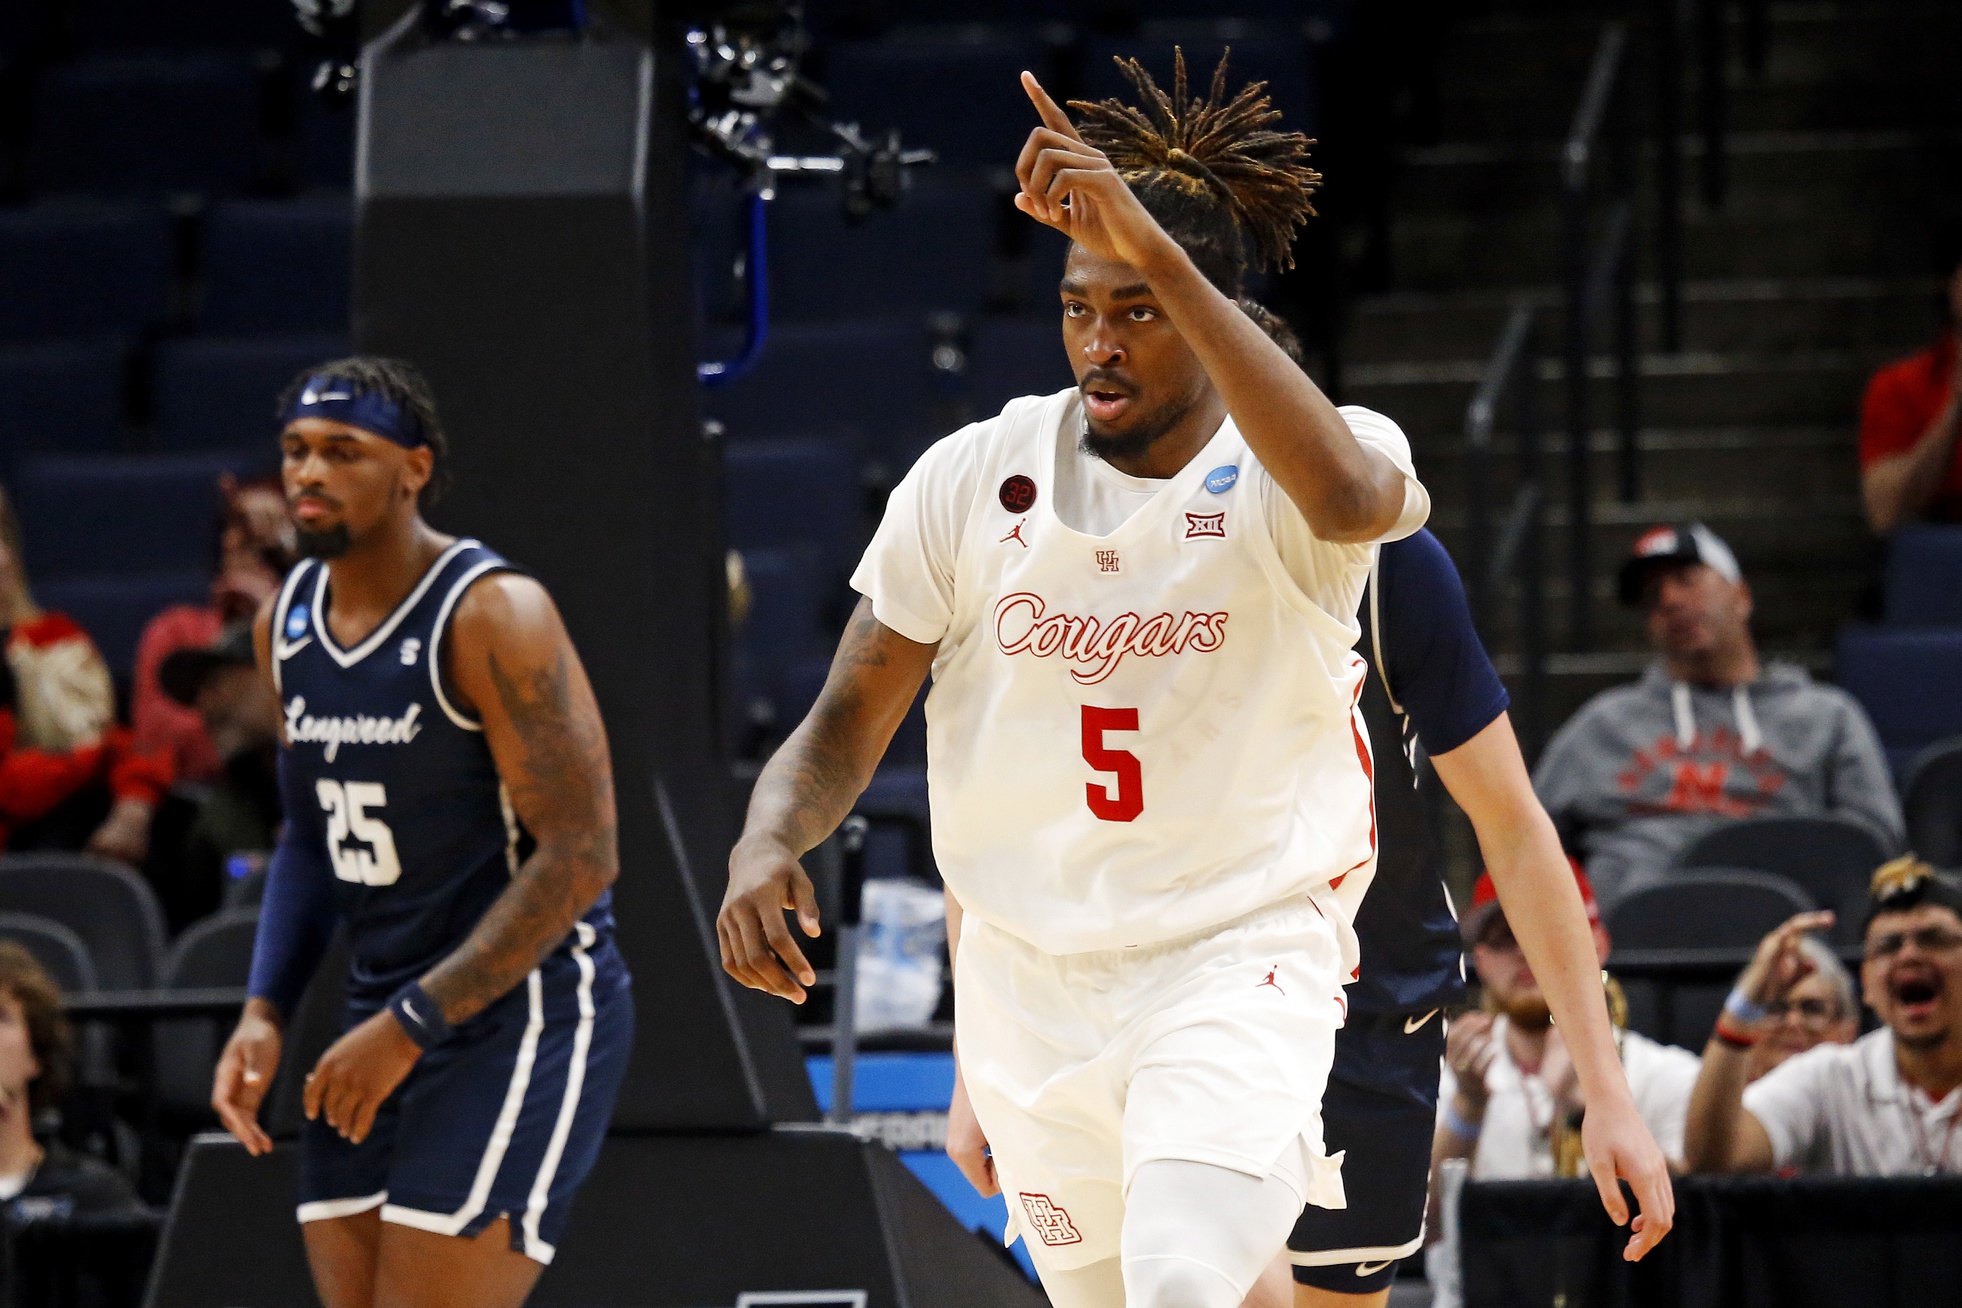 Houston Cougars forward Ja'Vier Francis (5) celebrates after a play during the second half of the game against the Longwood Lancers in the first round of the 2024 NCAA Tournament at FedExForum. Mandatory Credit: Petre Thomas-USA TODAY Sports